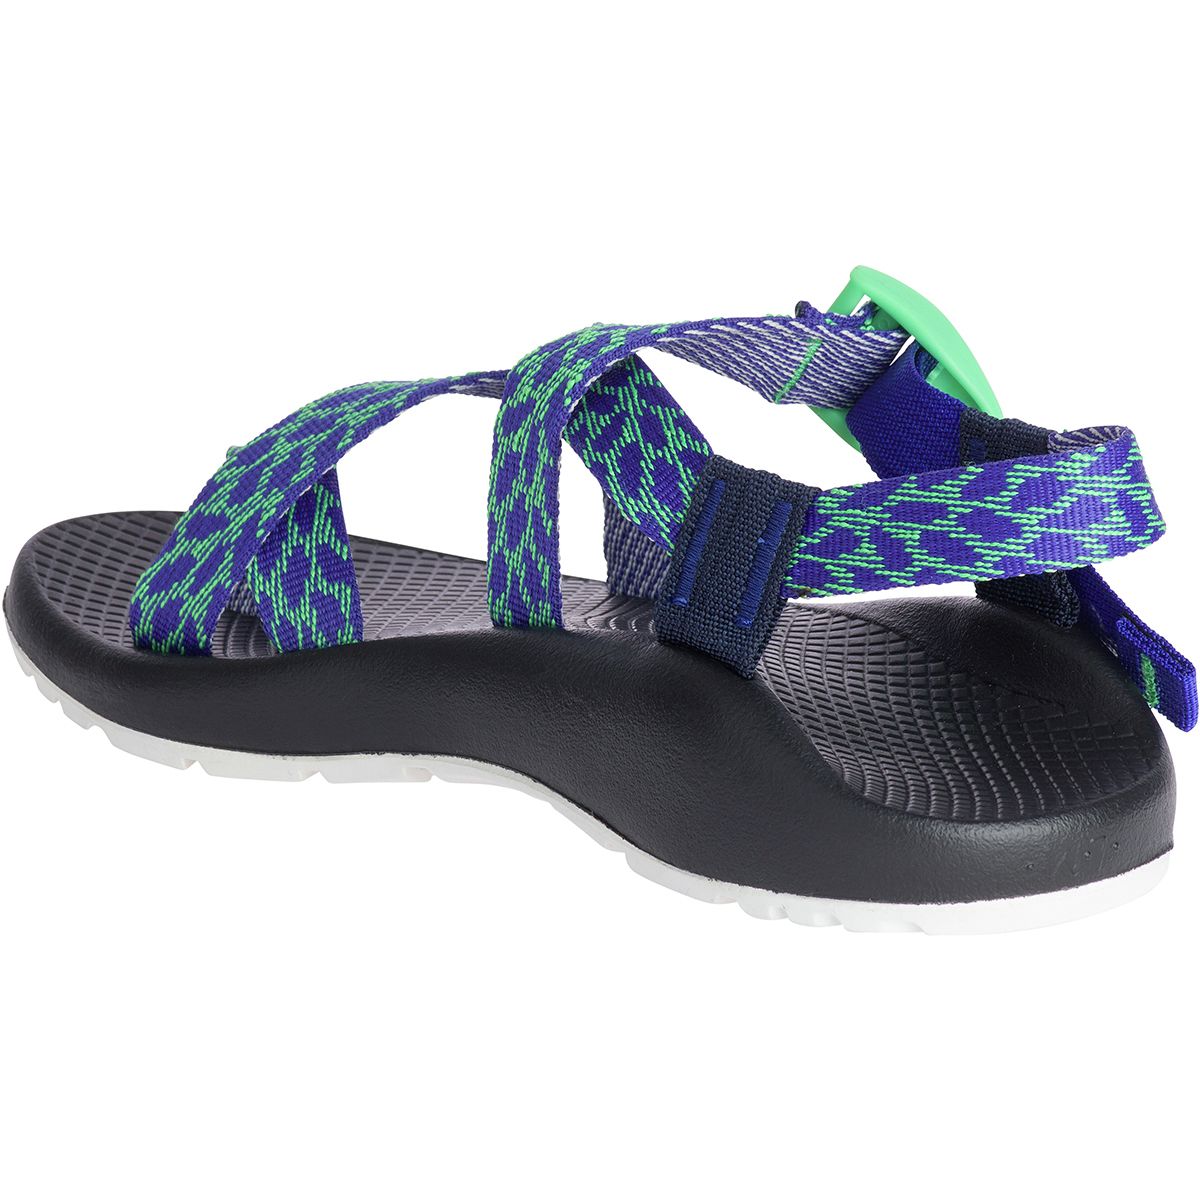 steep and cheap chacos